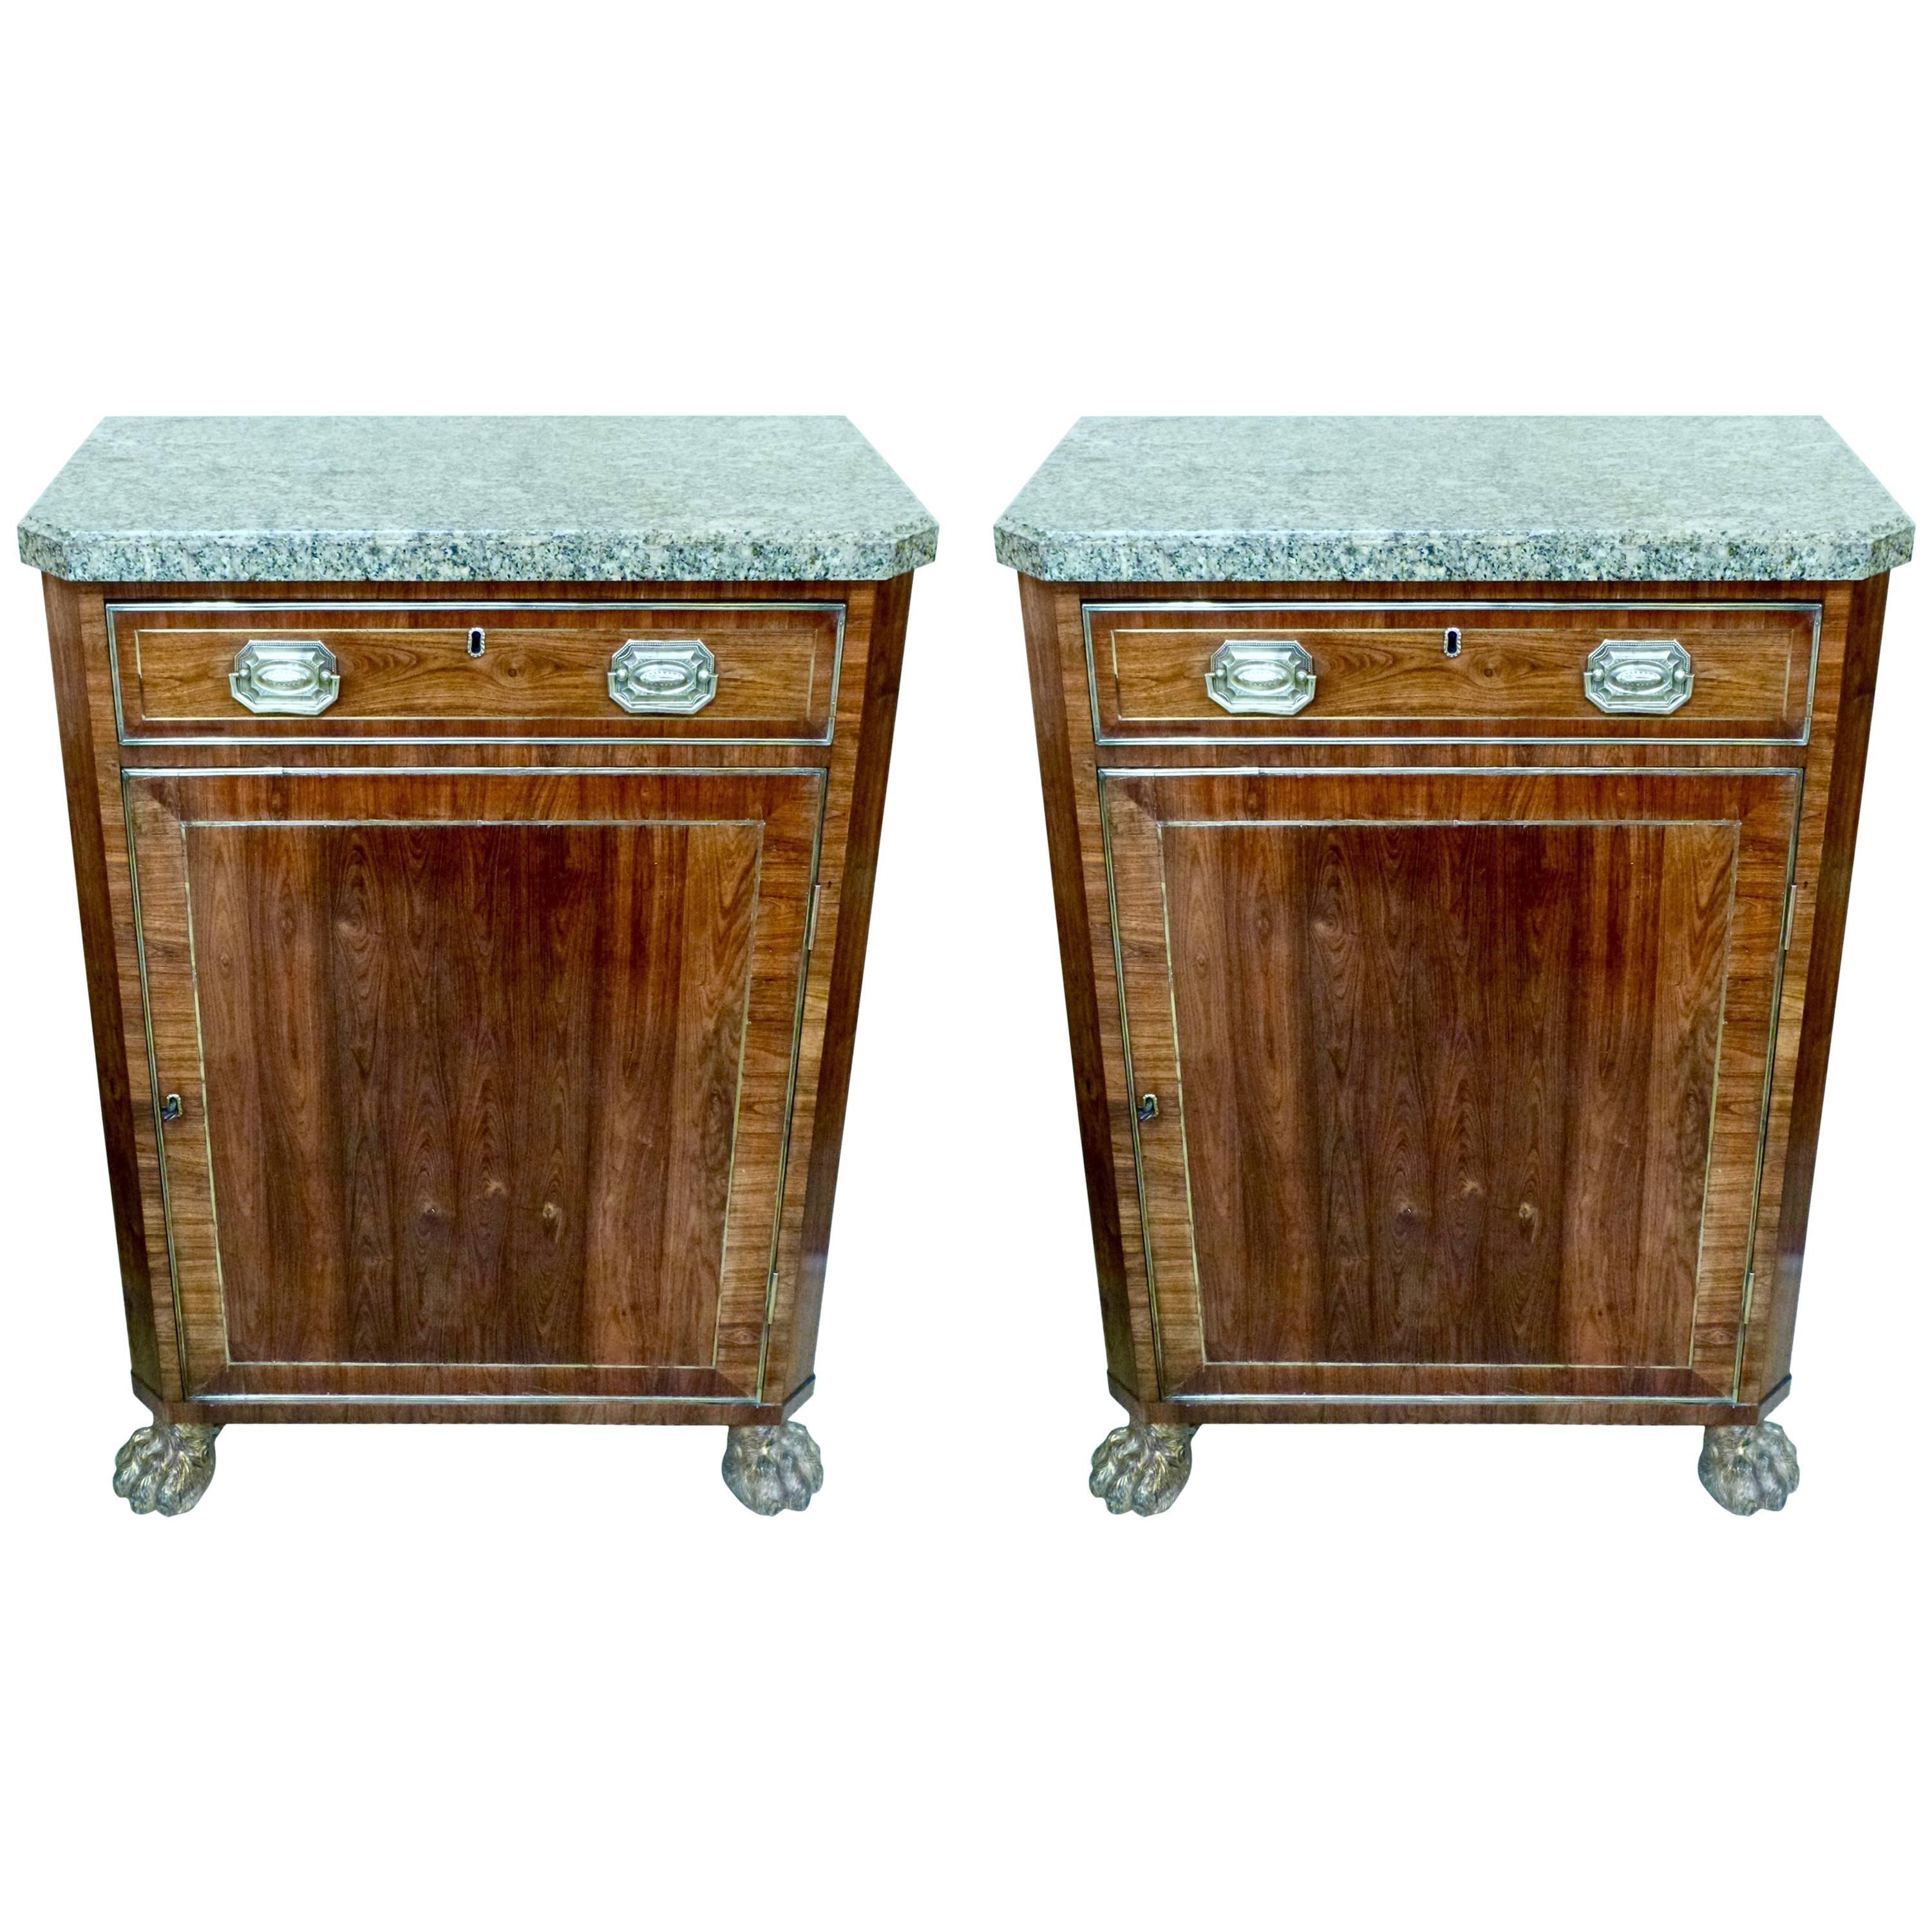 Pair of 19th Century Kingwood Brass Inlaid Cabinets For Sale